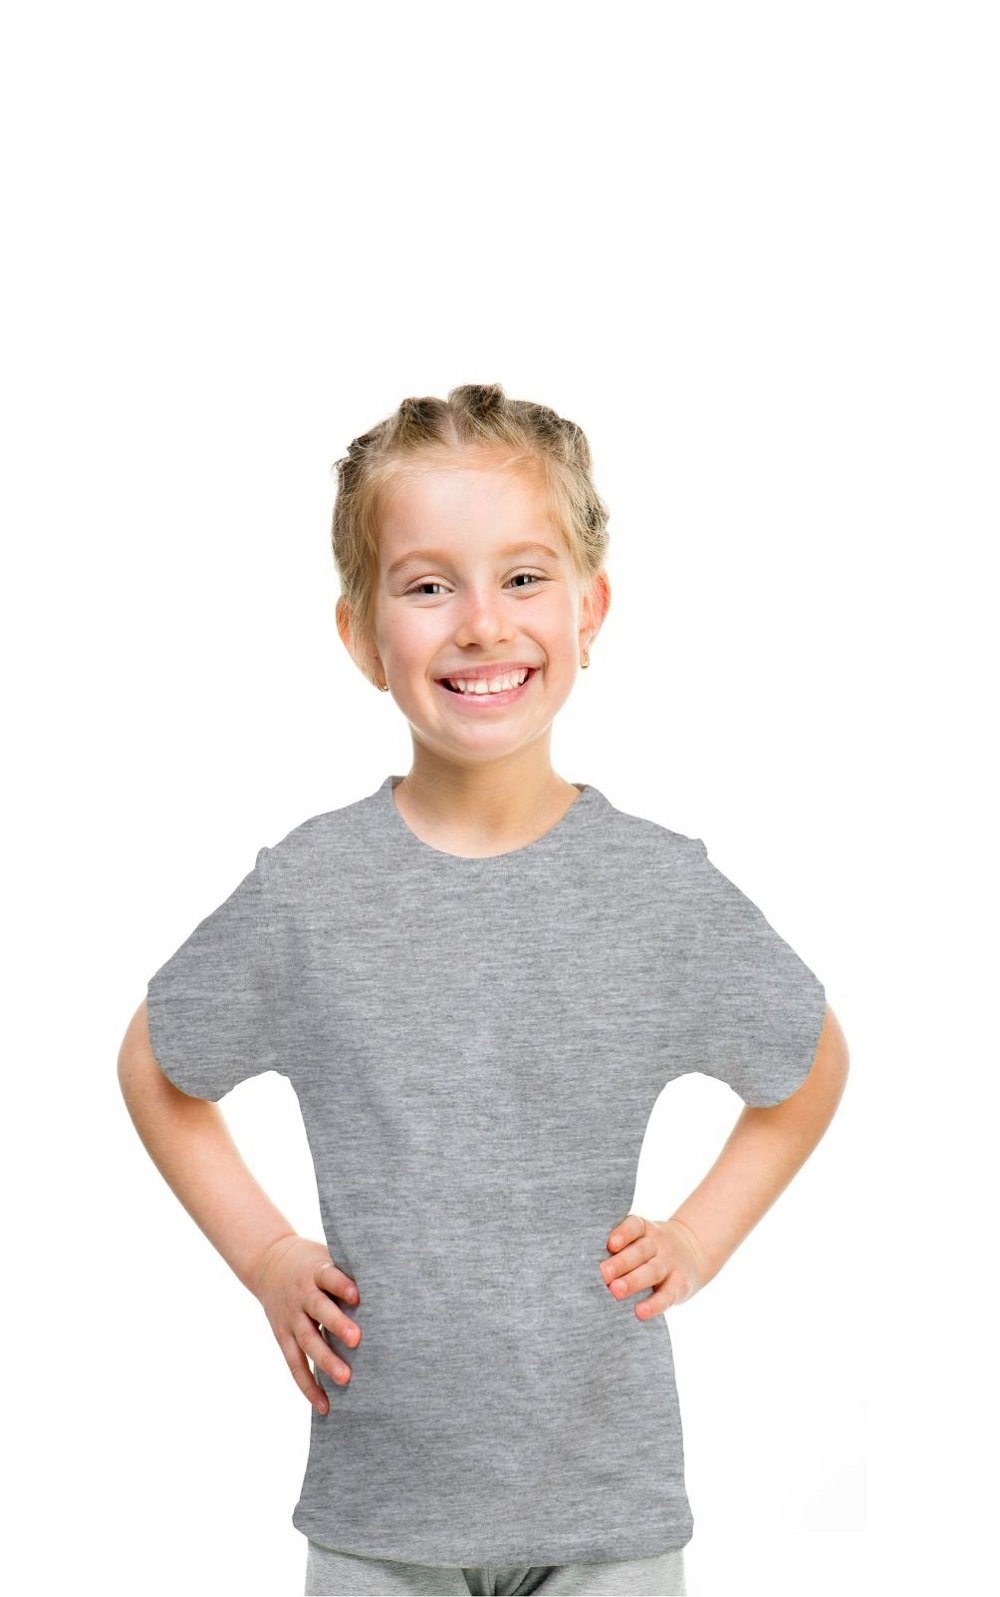 DOUBLE F ROUND NECK HALF SLEEVE LIGHT GREY COLOR PLAIN T-SHIRT FOR GIRLS